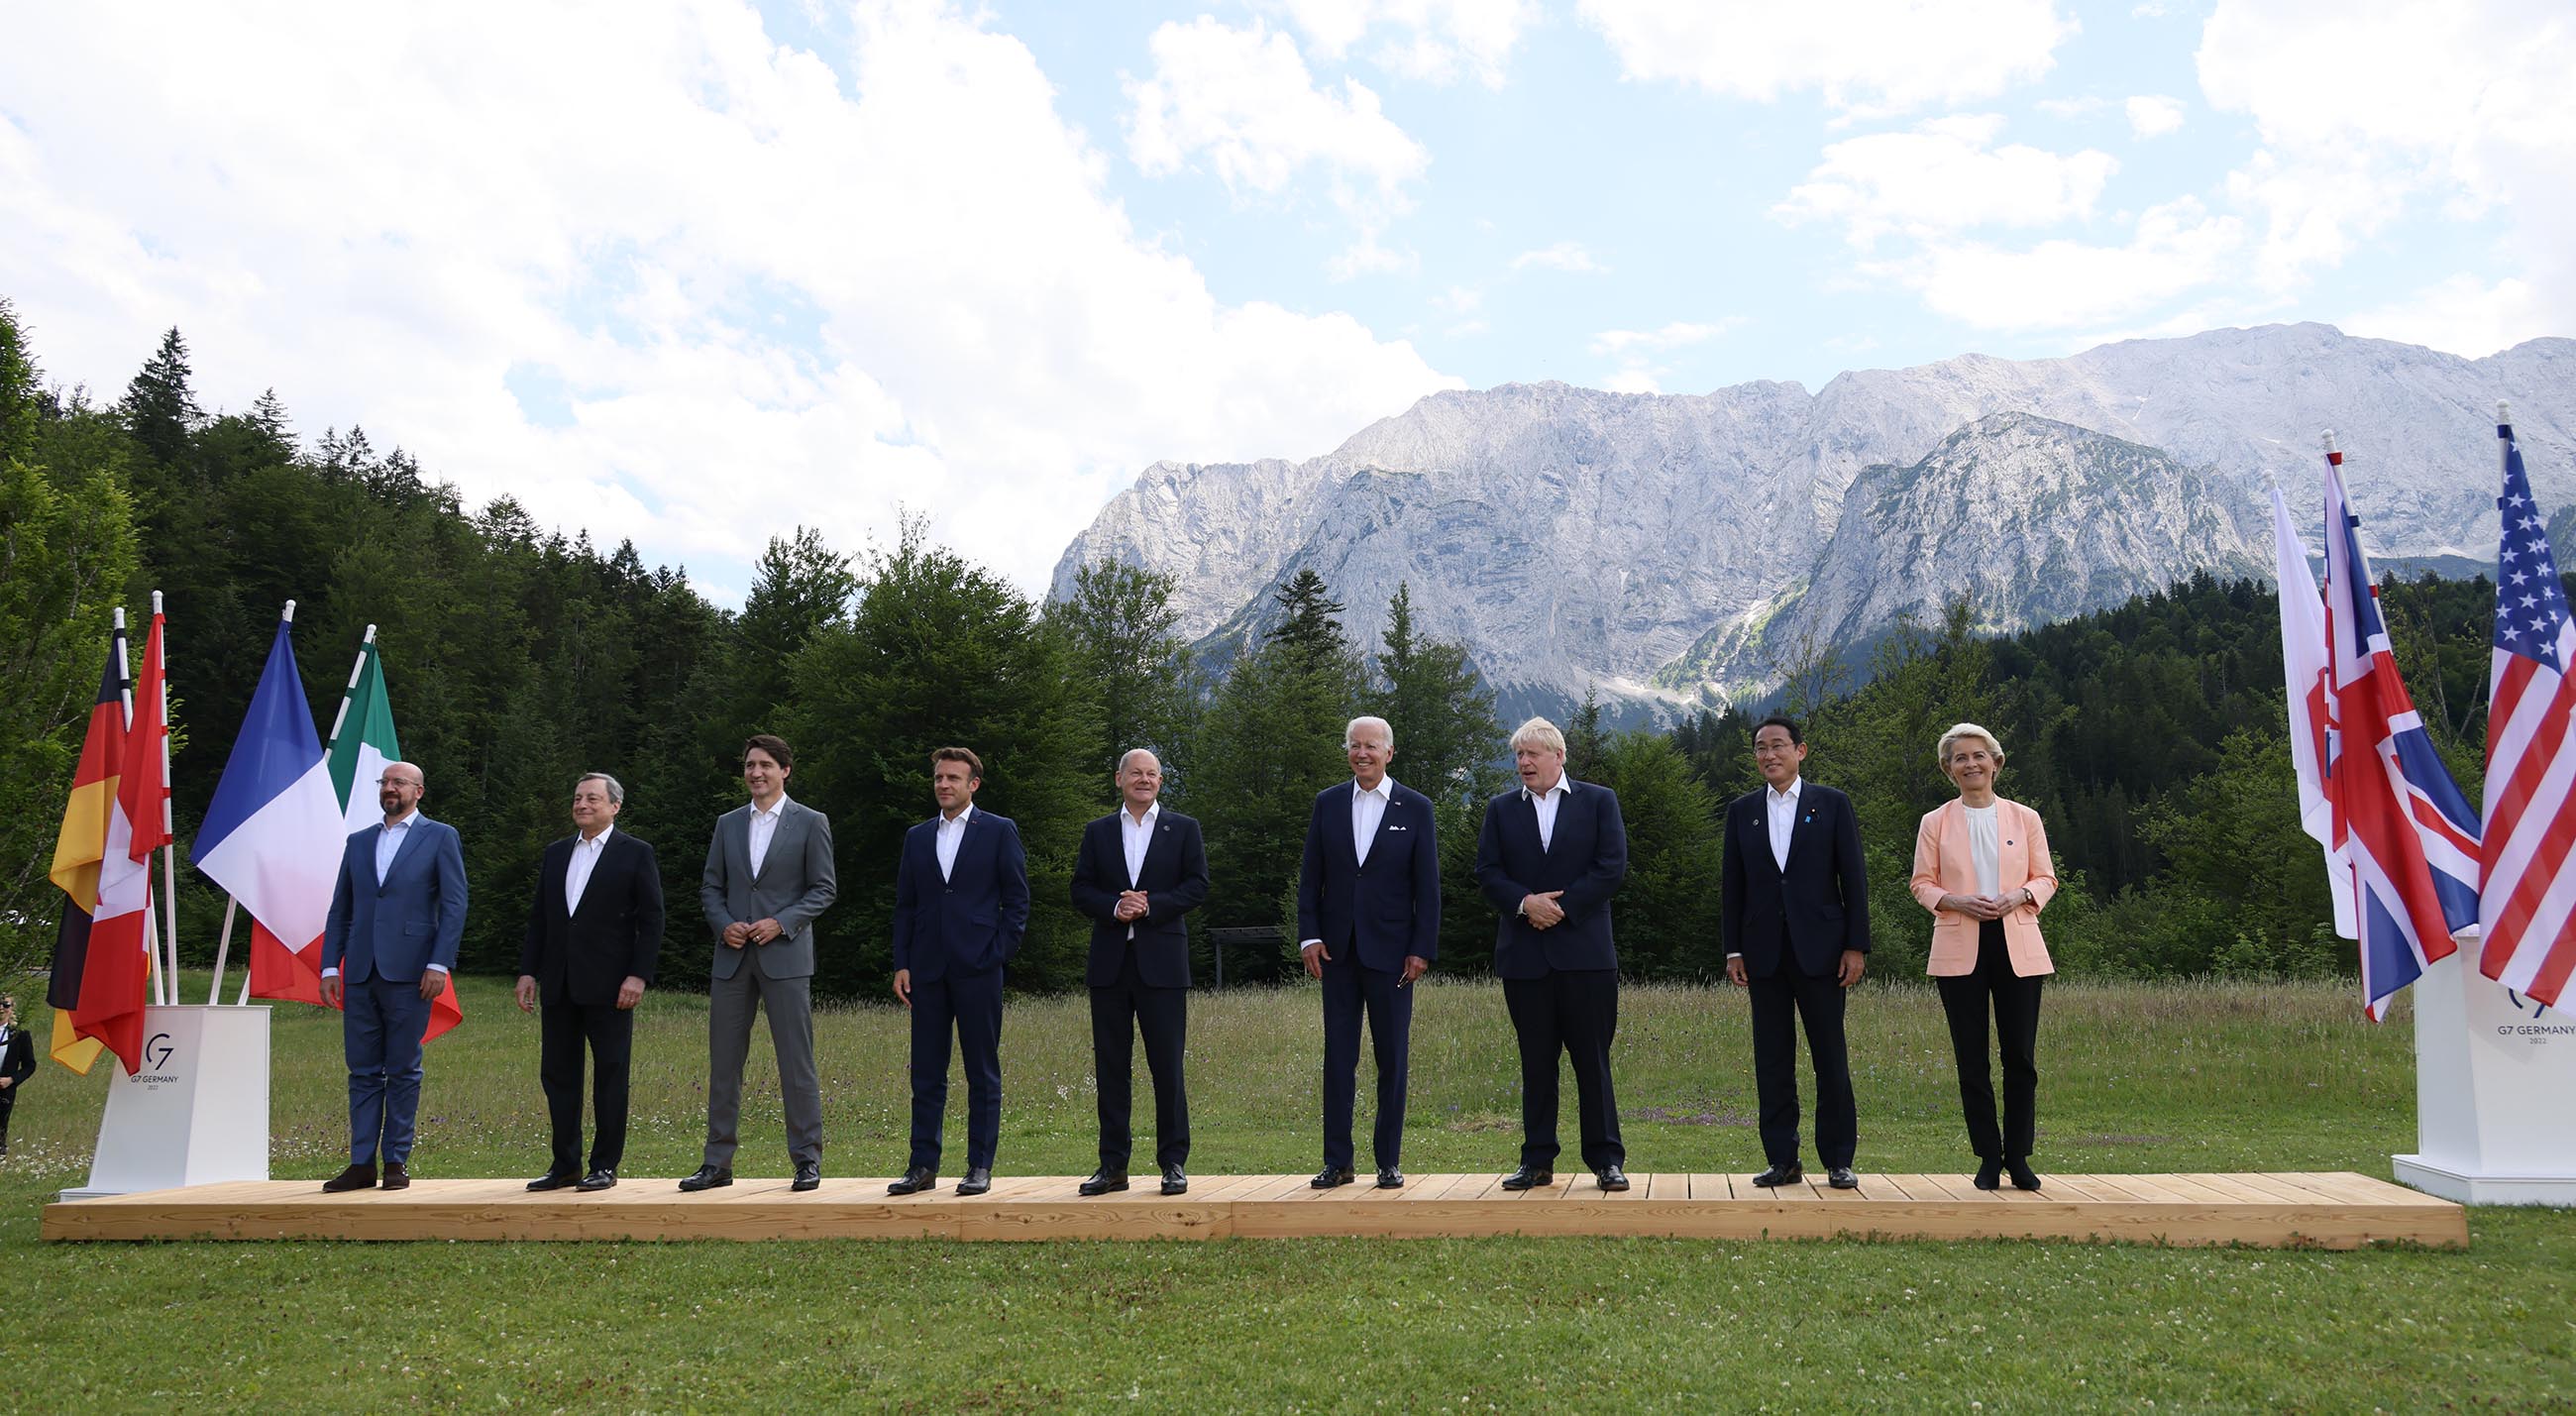 Ｇ７首脳との集合写真撮影１